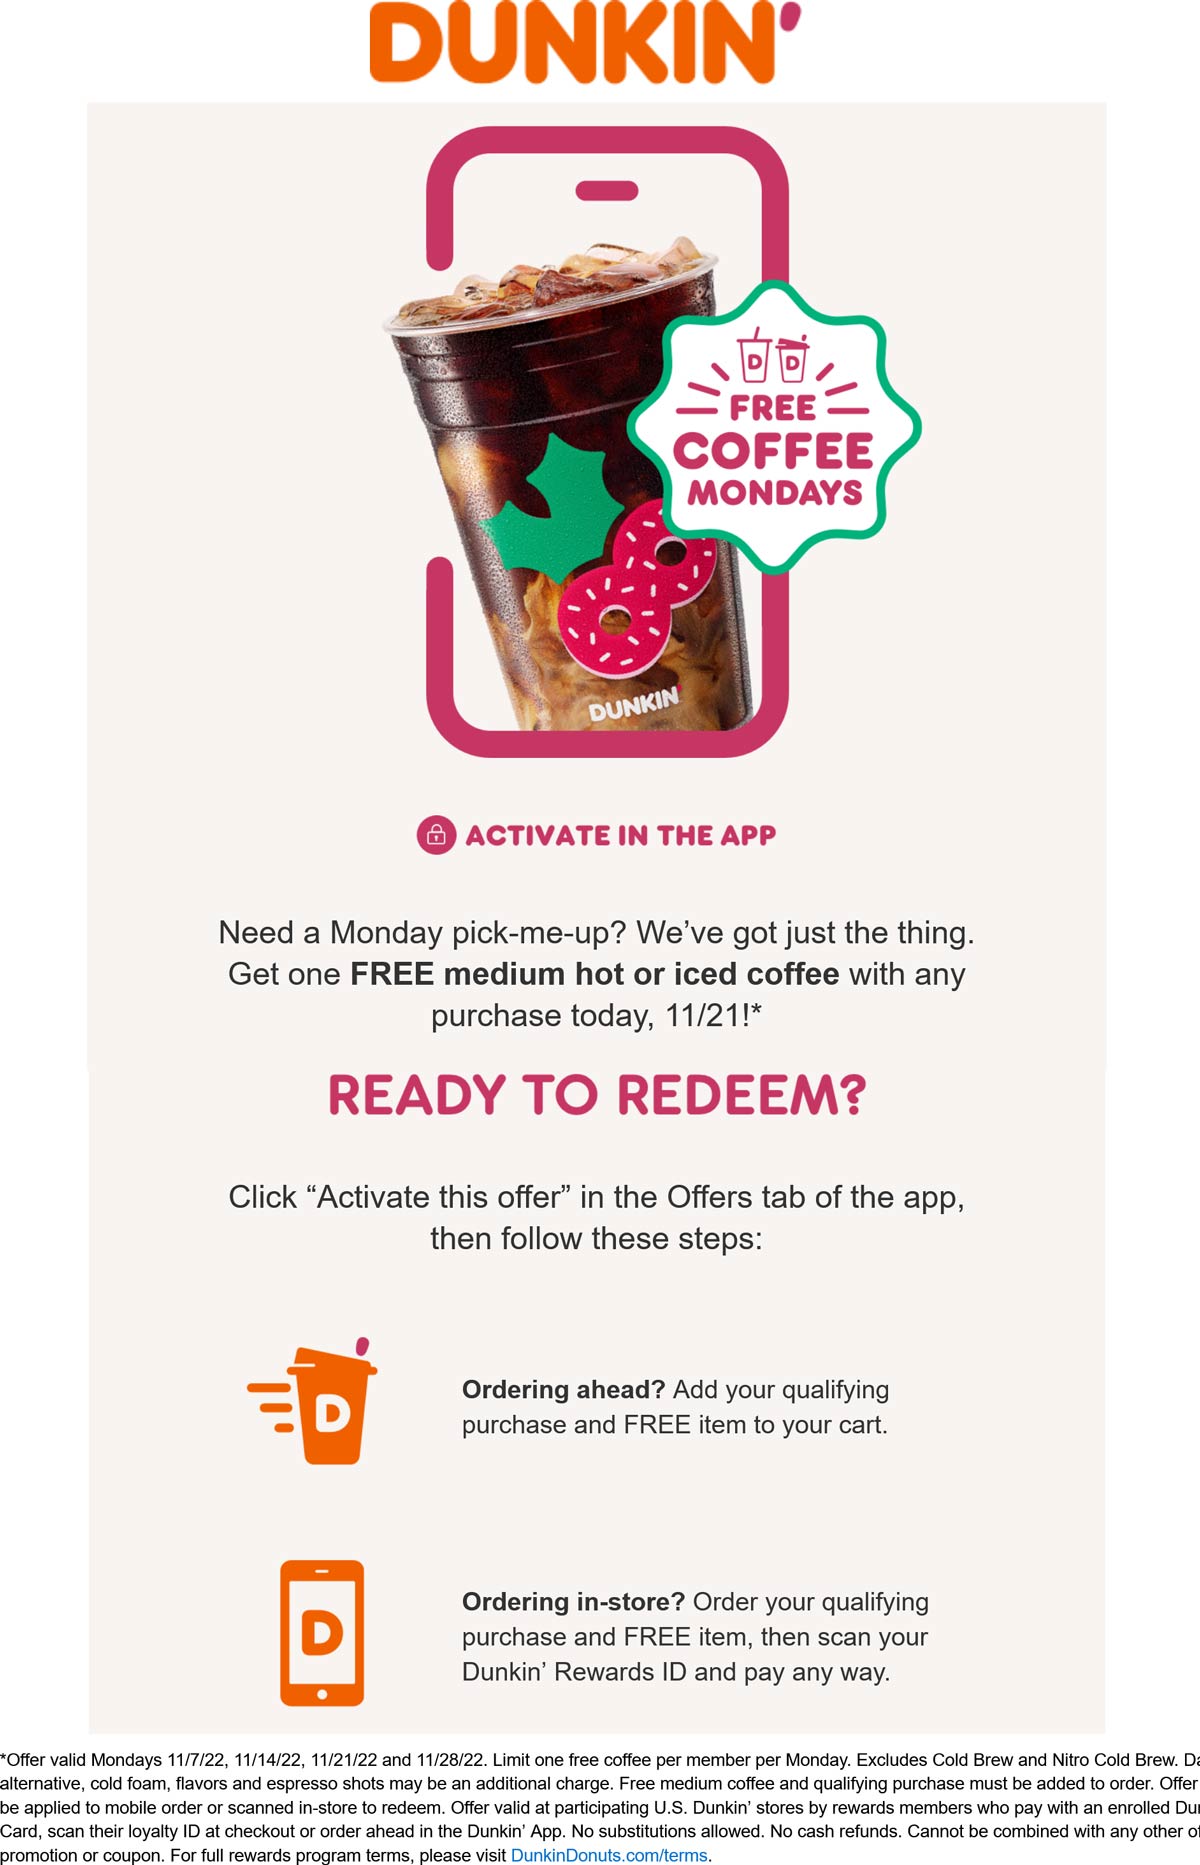 Dunkin restaurants Coupon  Free coffee Mondays via mobile at Dunkin donuts #dunkin 